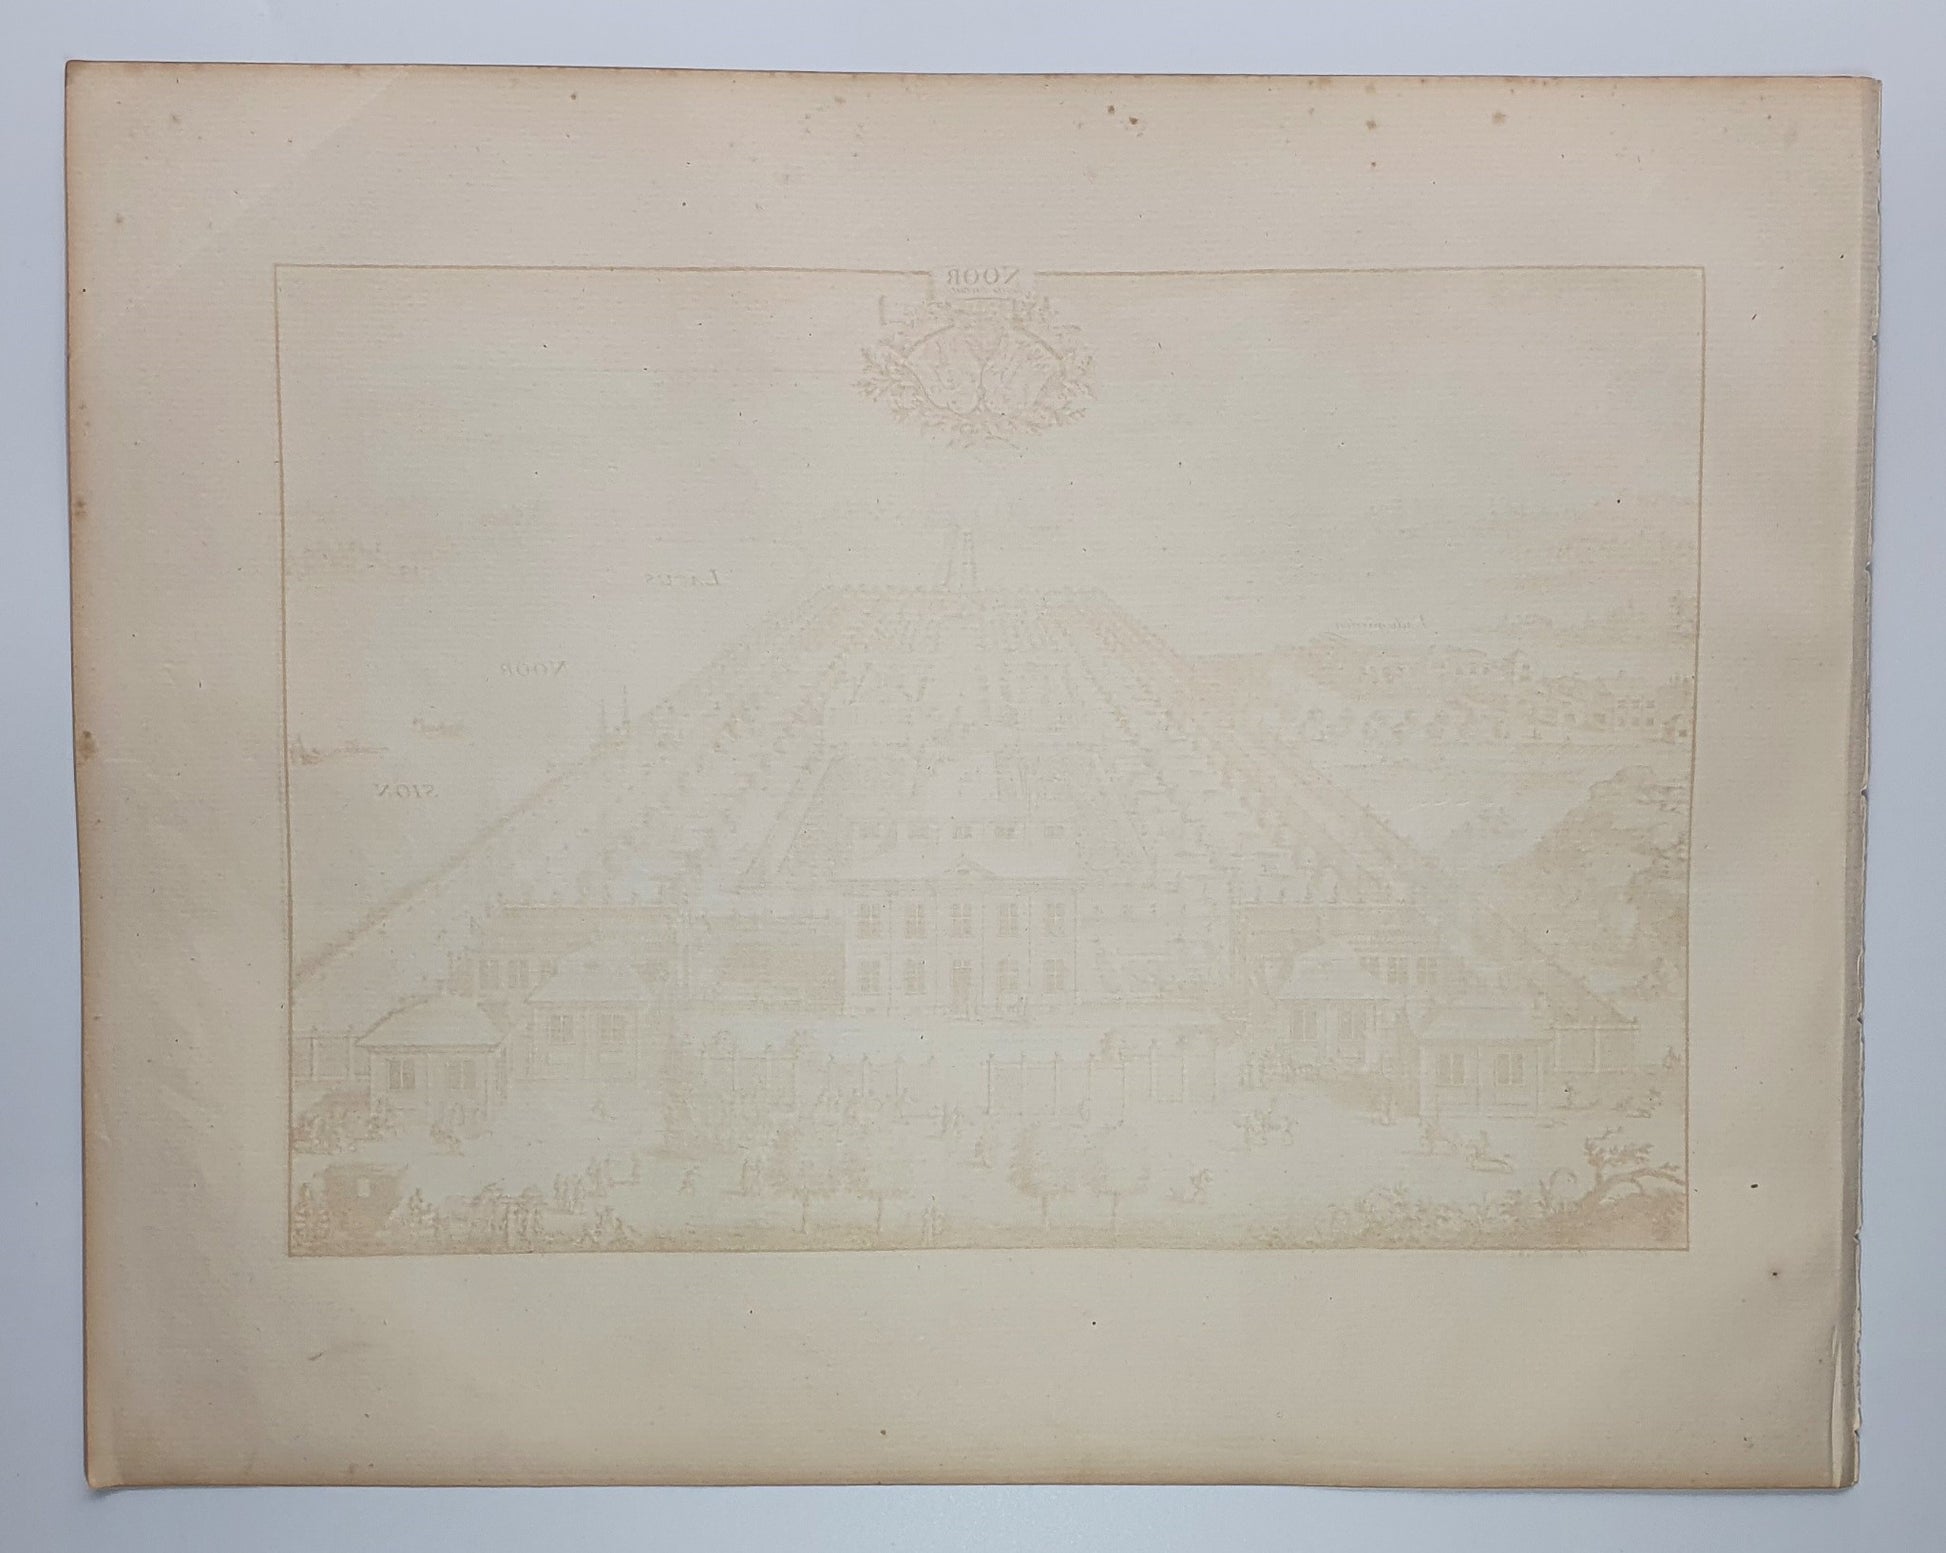 Antique Topographical Print - Nasby Castle - Stora Vartan in Taby Municipality - Dahlströms Fine Art